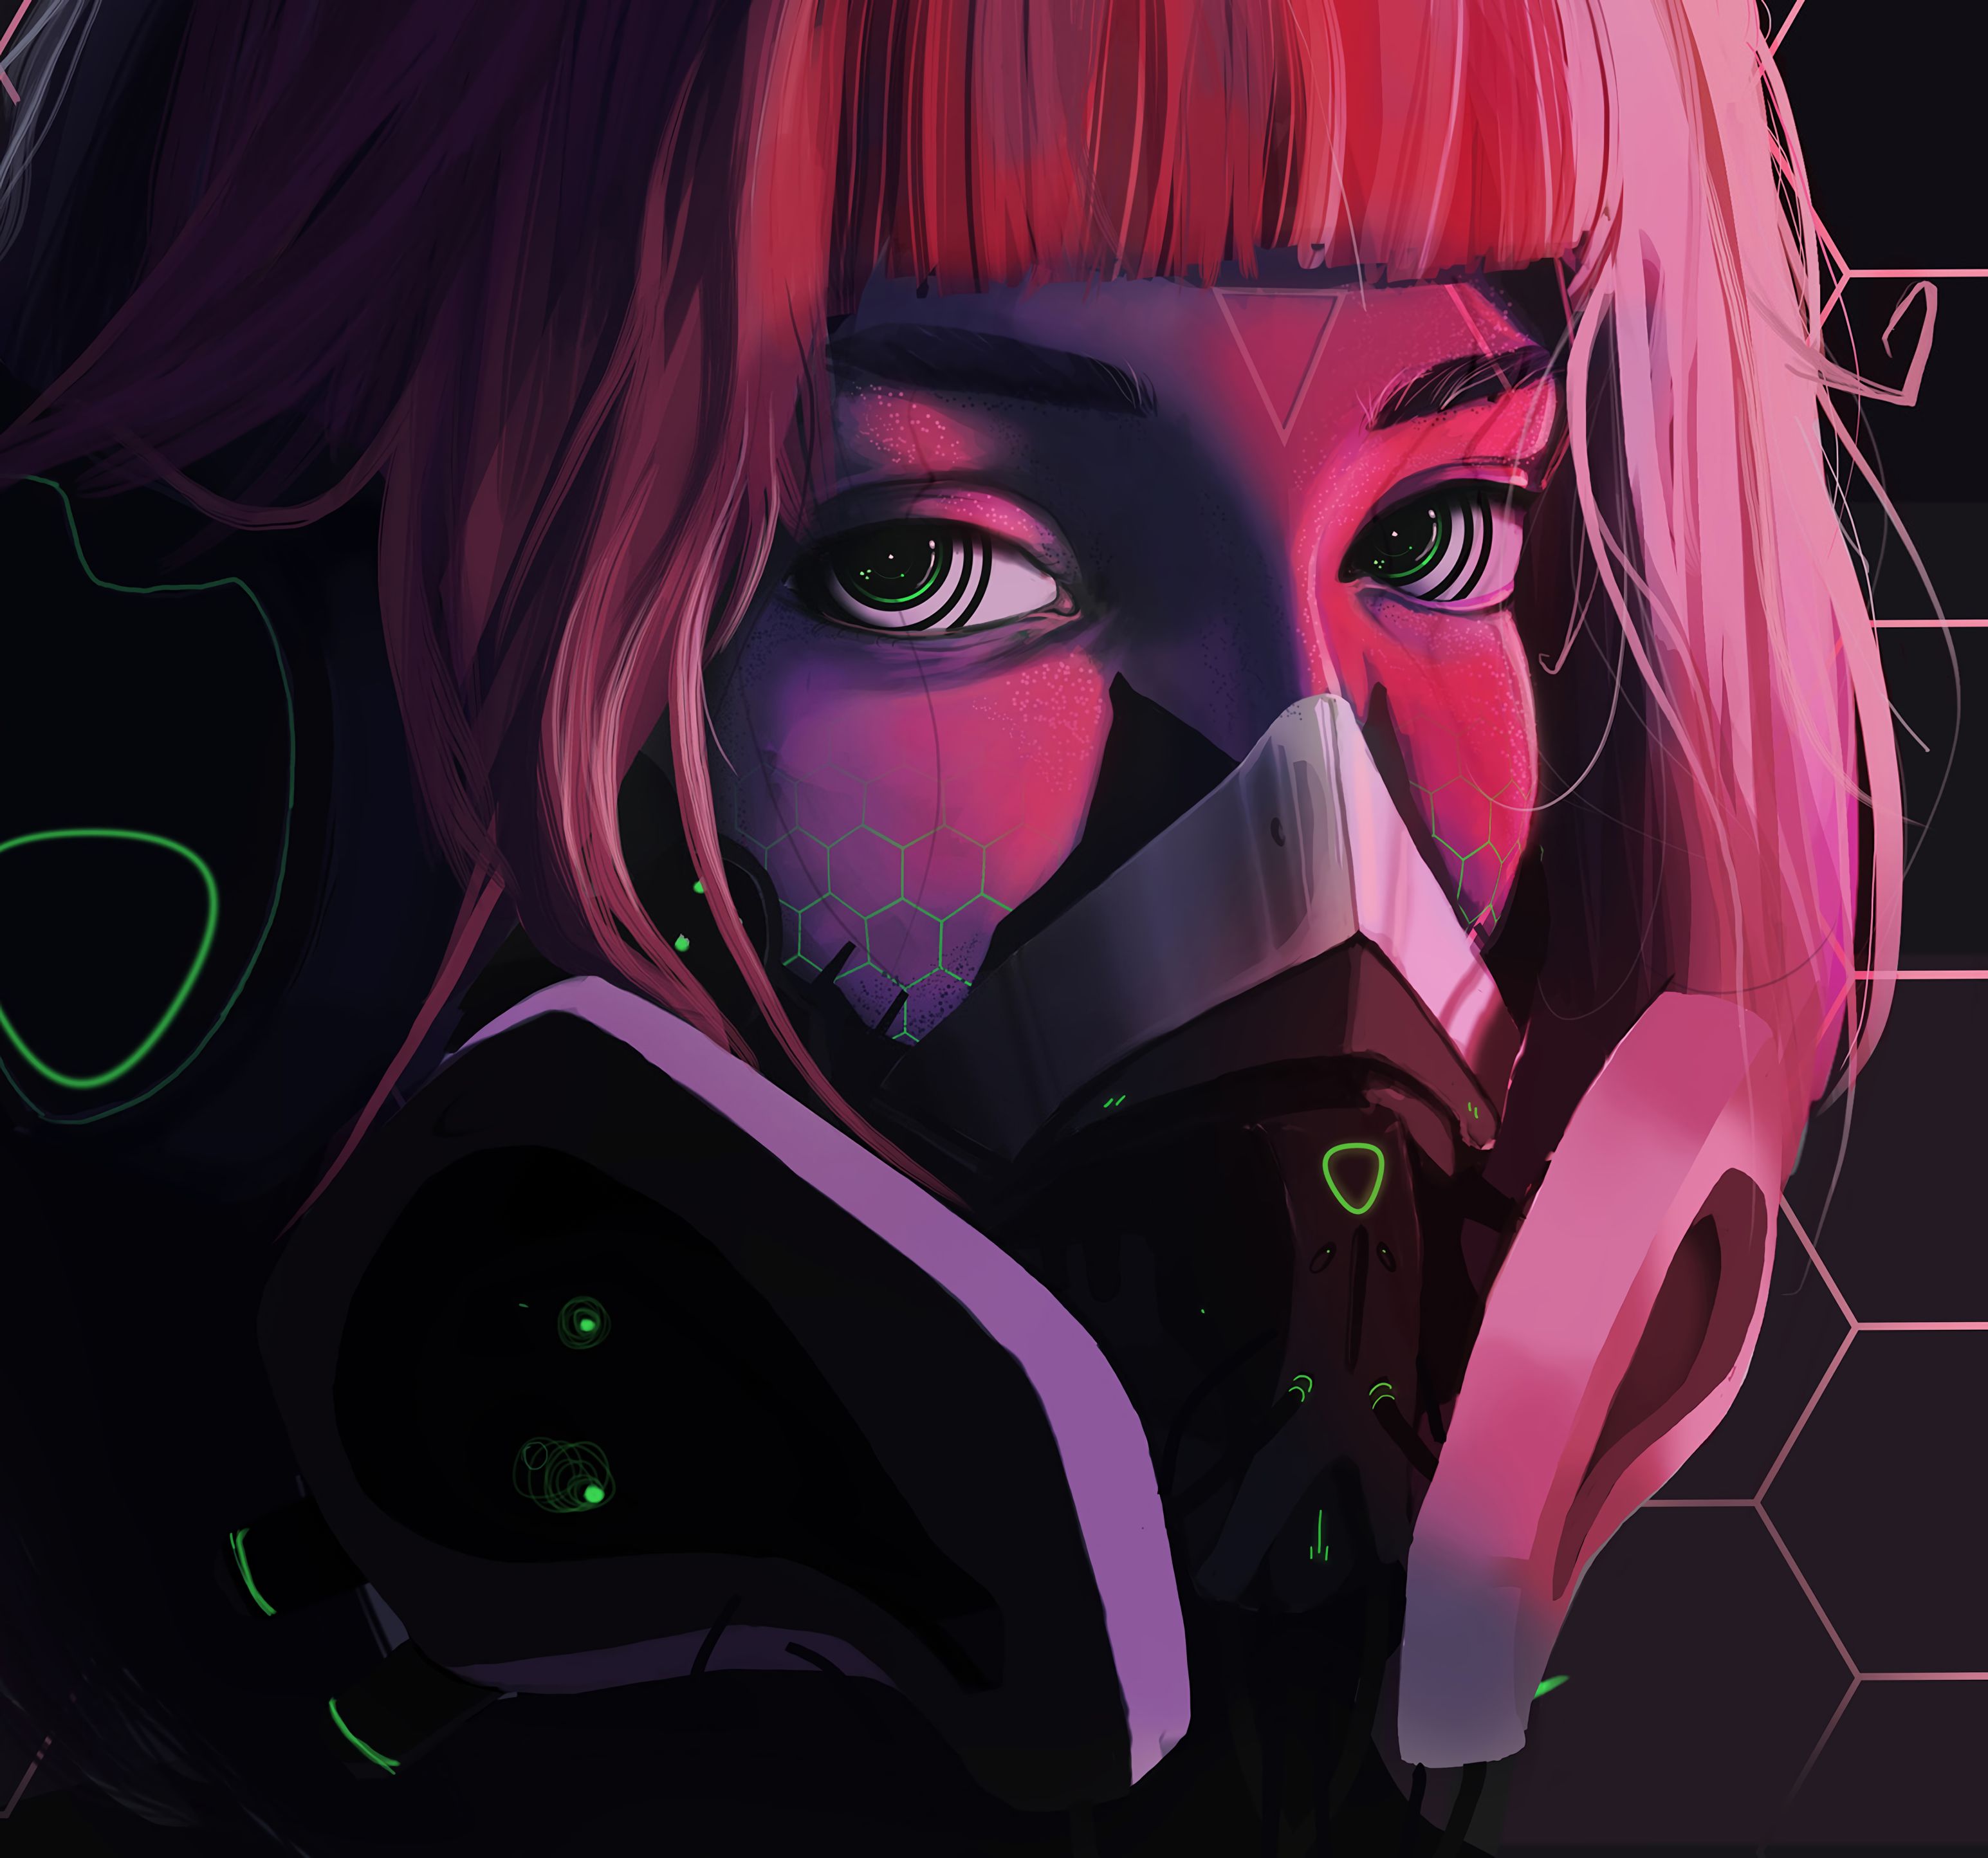 107048 download wallpaper cyberpunk, art, eyes, girl, mask, face, respirator screensavers and pictures for free